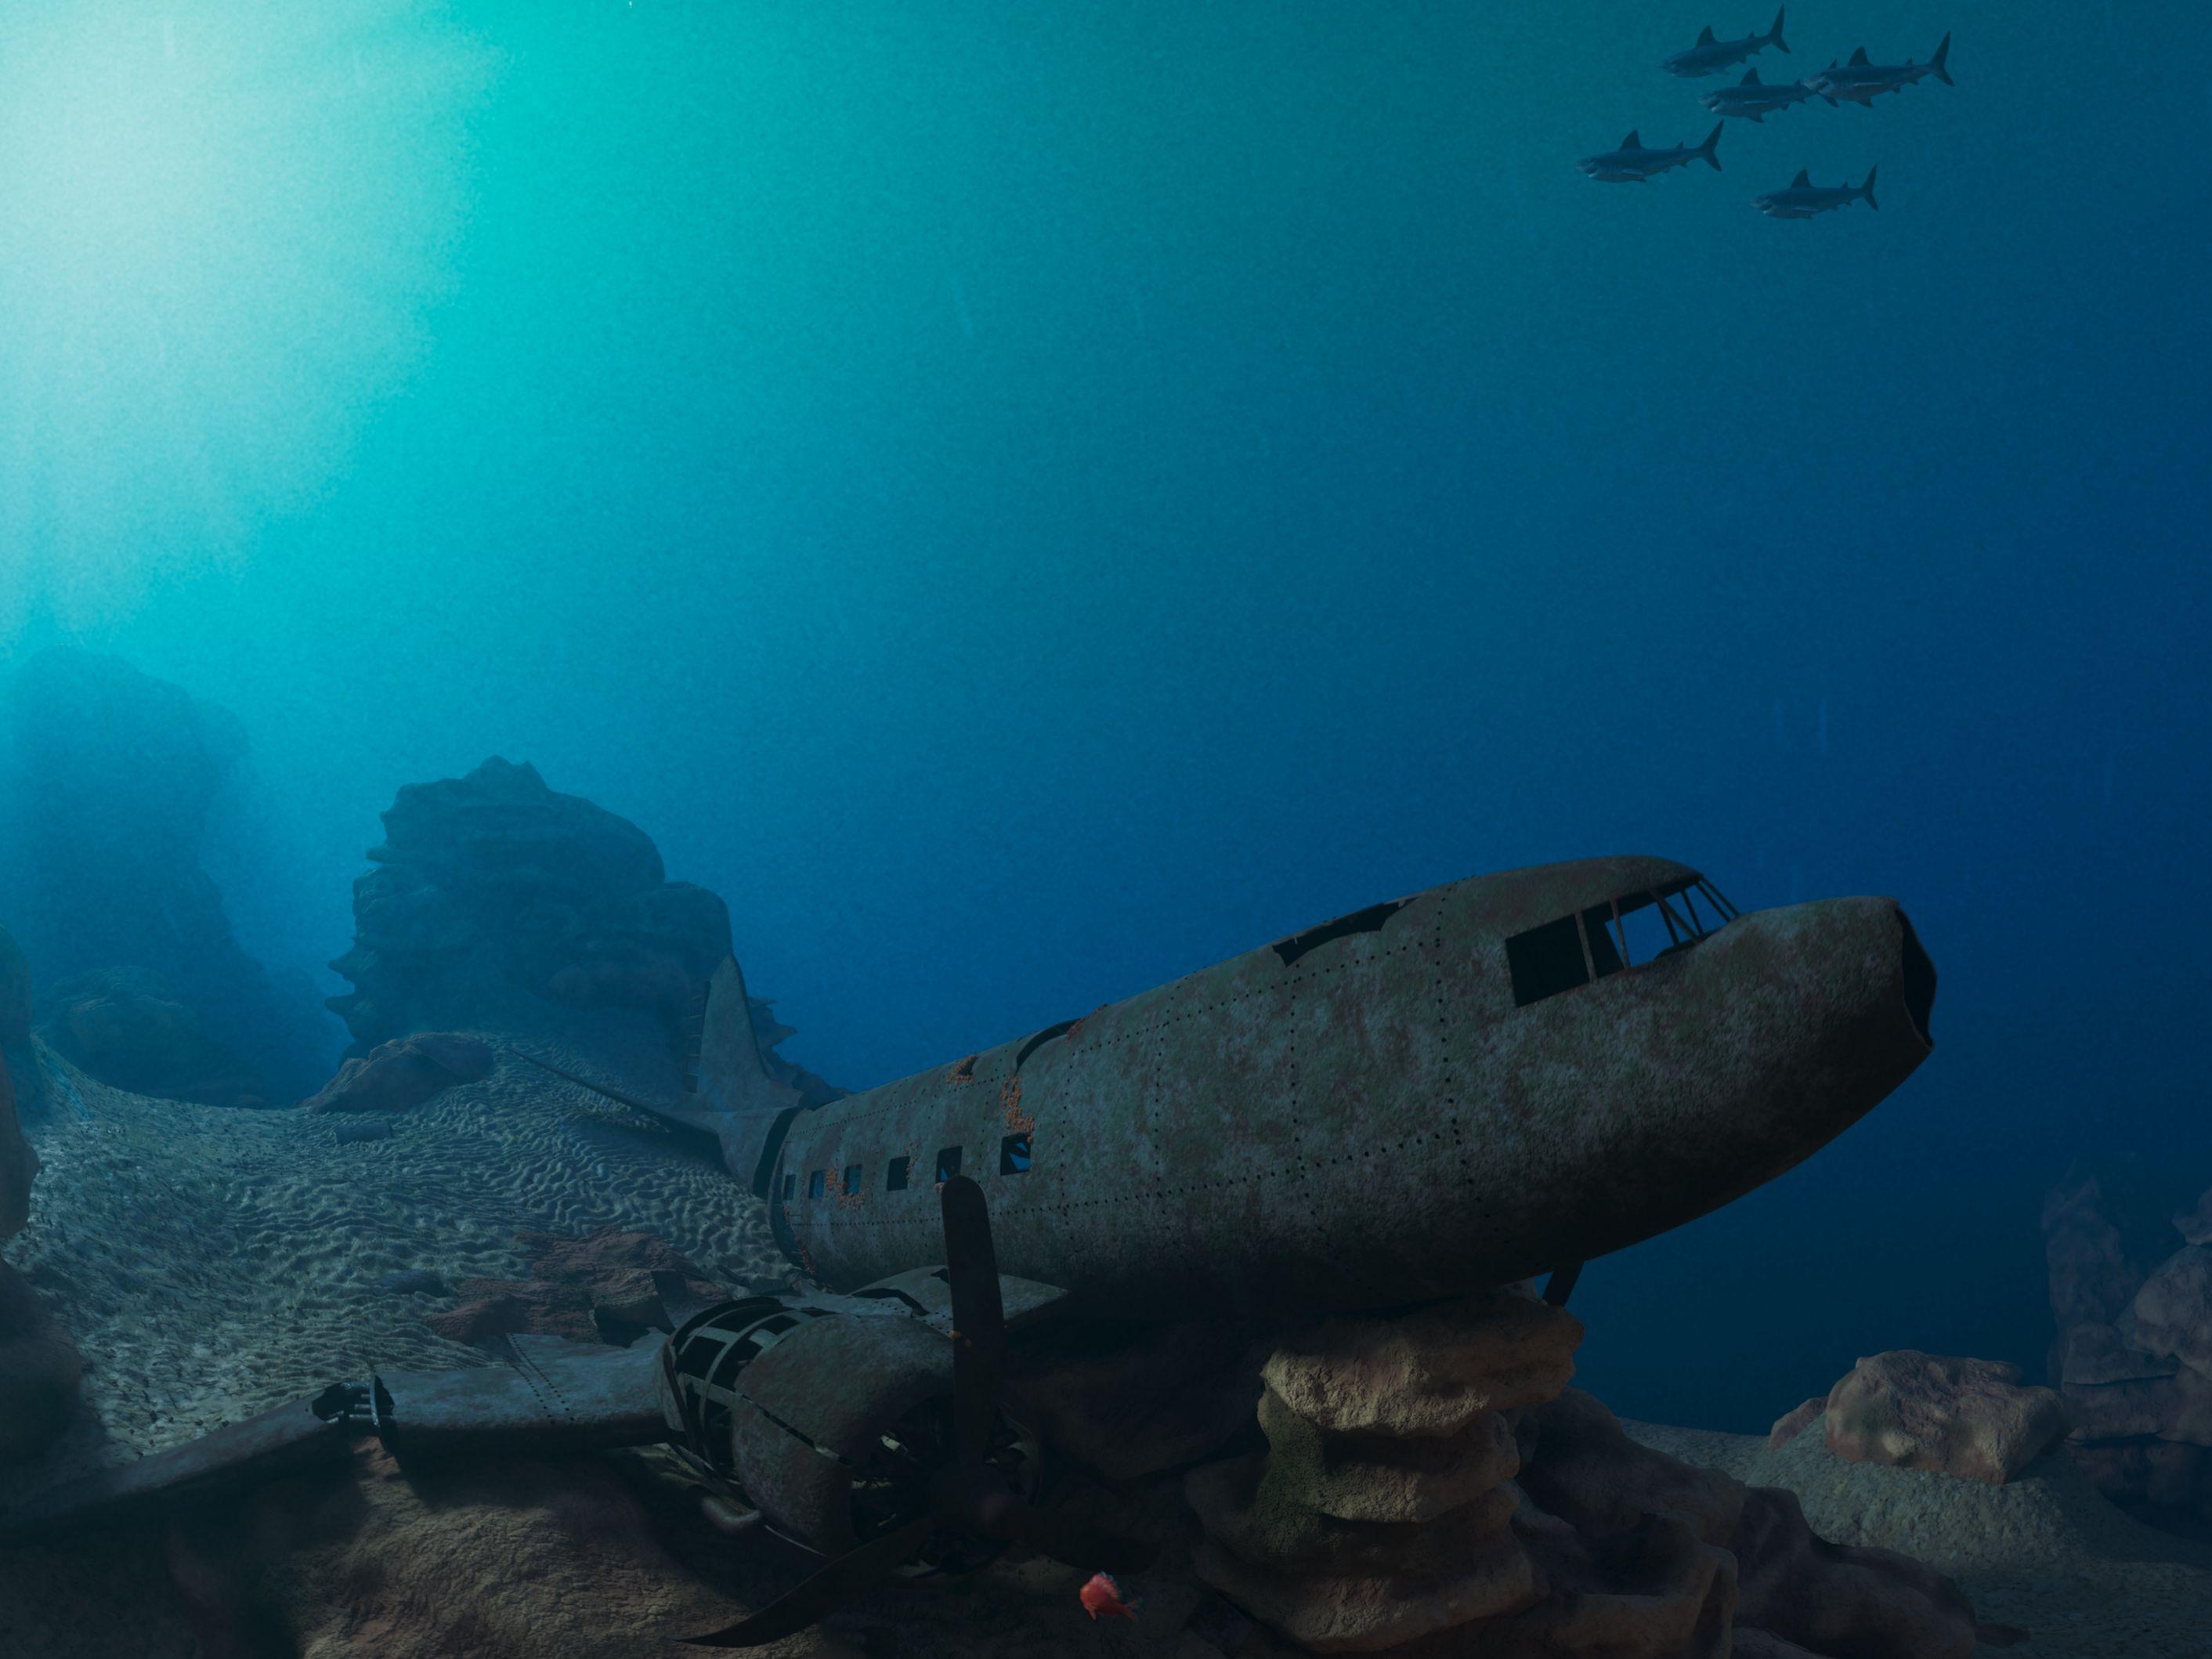 The Hong Kong Space Museum will screen a new 3D dome show, "Legend of the Enchanted Reef 3D", at its Space Theatre starting October 1 (Sunday) to lead audiences to explore the underwater world. Picture shows a wreckage of an airplane resting on the ocean floor, which is now a sanctuary for marine creatures. (Source of photo: SOFTMACHINE)